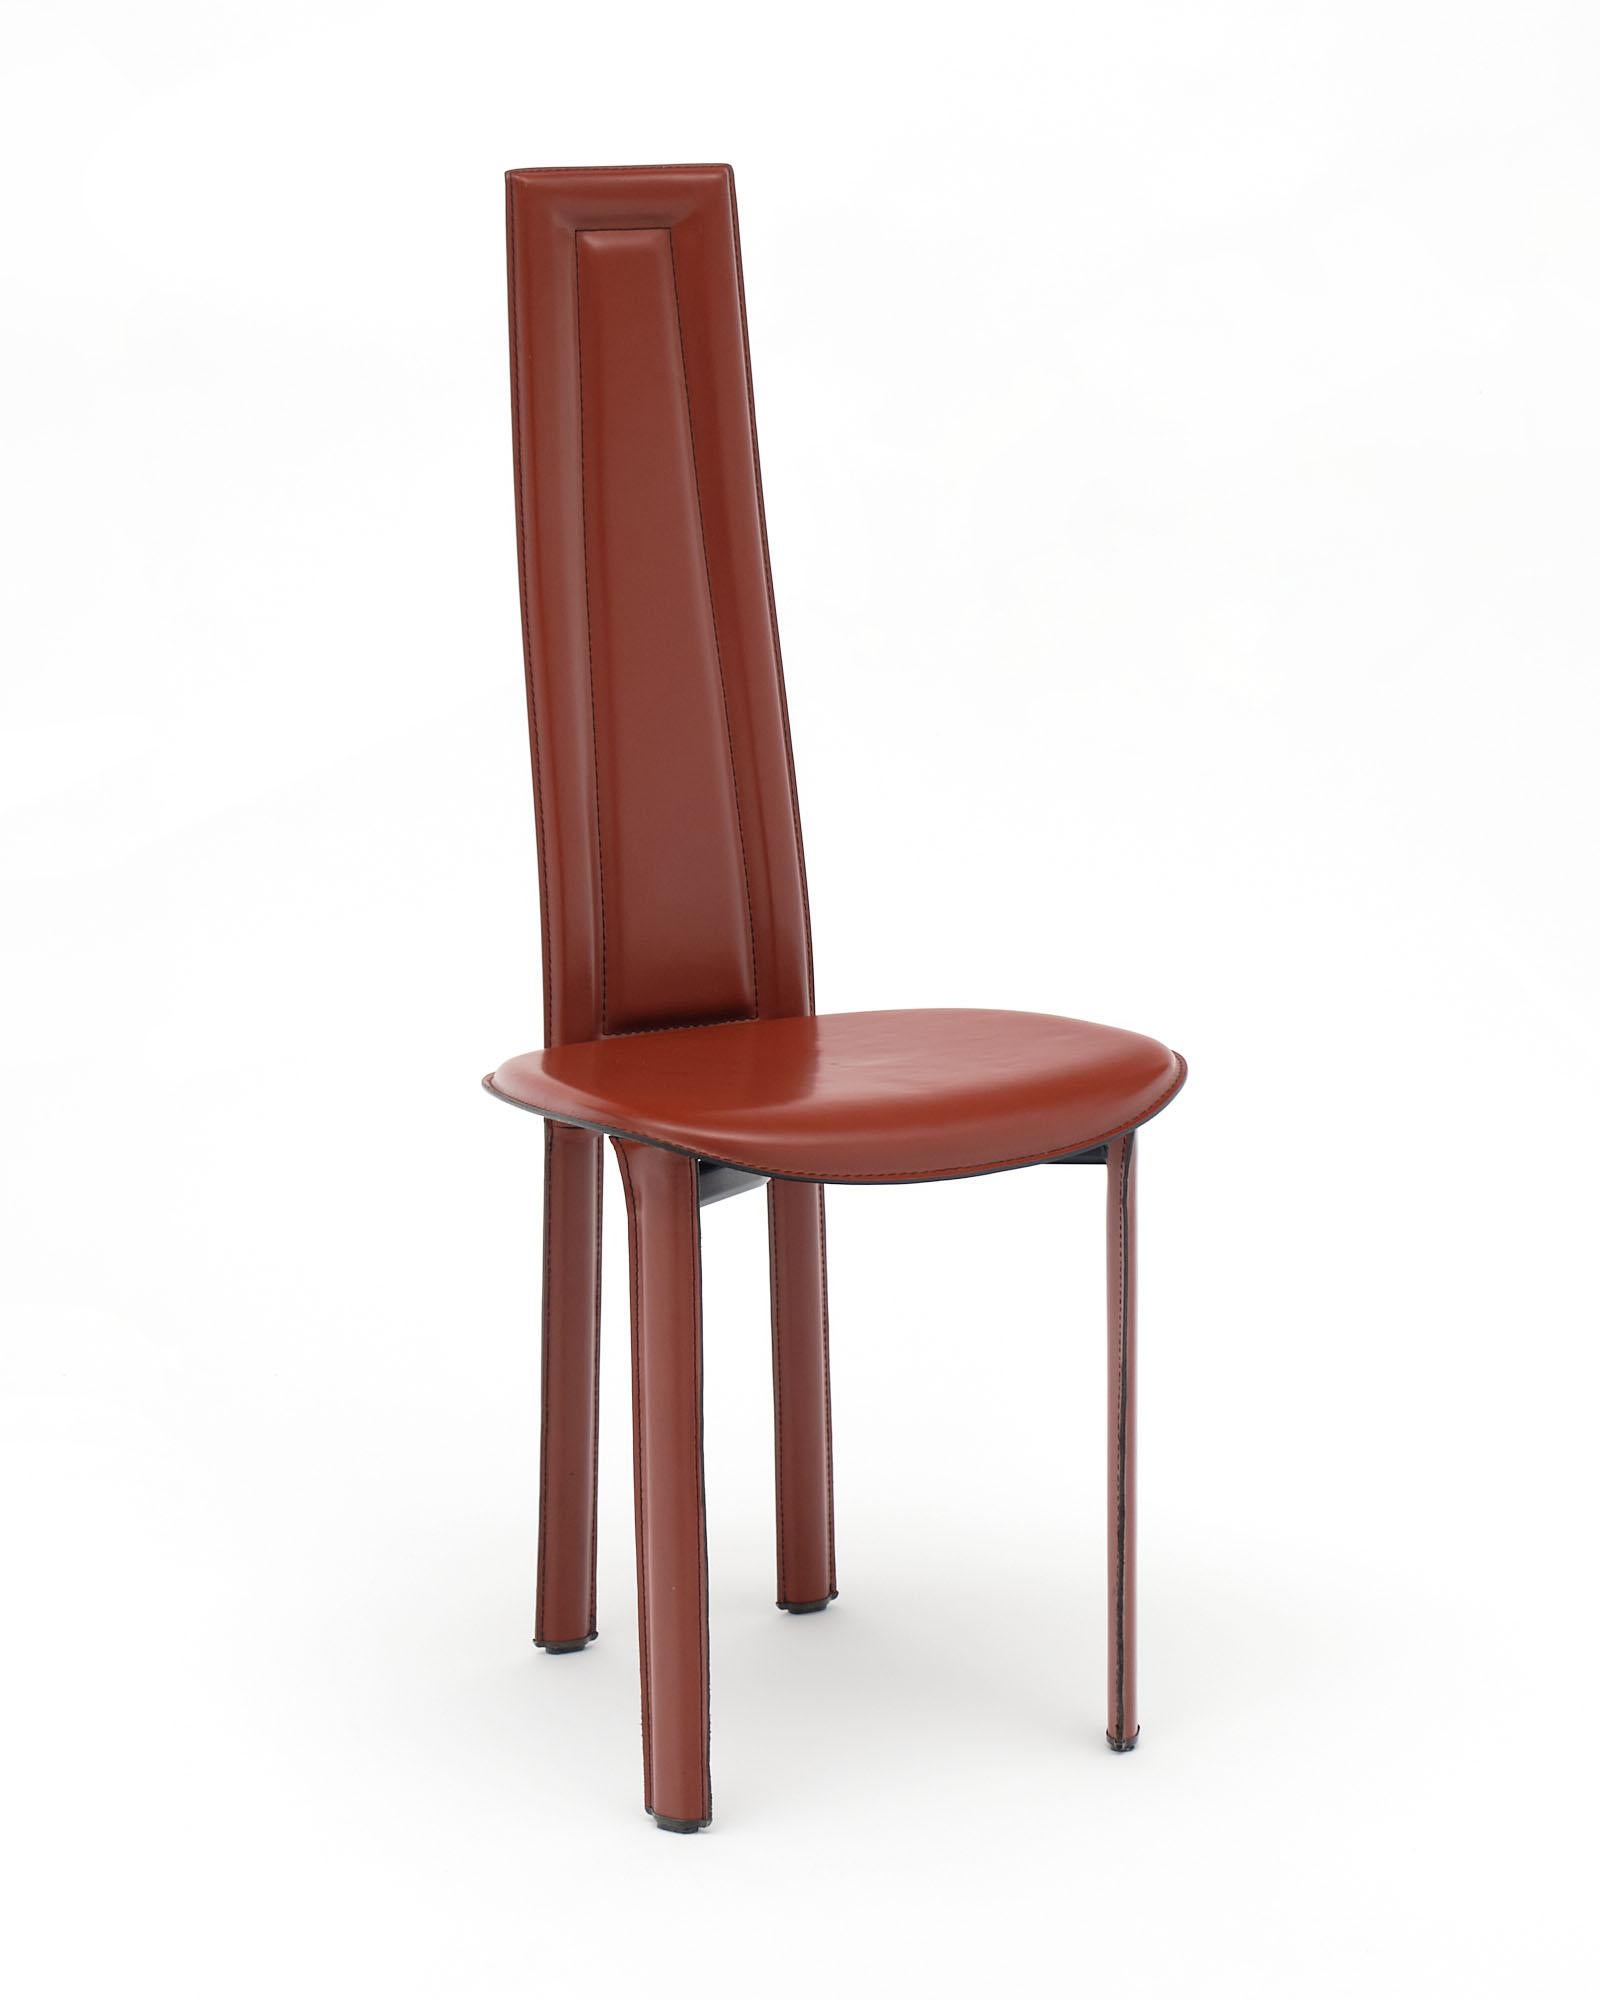 Italian set of four red leather dining chairs in the manner of Italian designer Pietro Costantini. The design offers high backs and thin linear leather legs. The strong stitched leather design provides superb comfort.